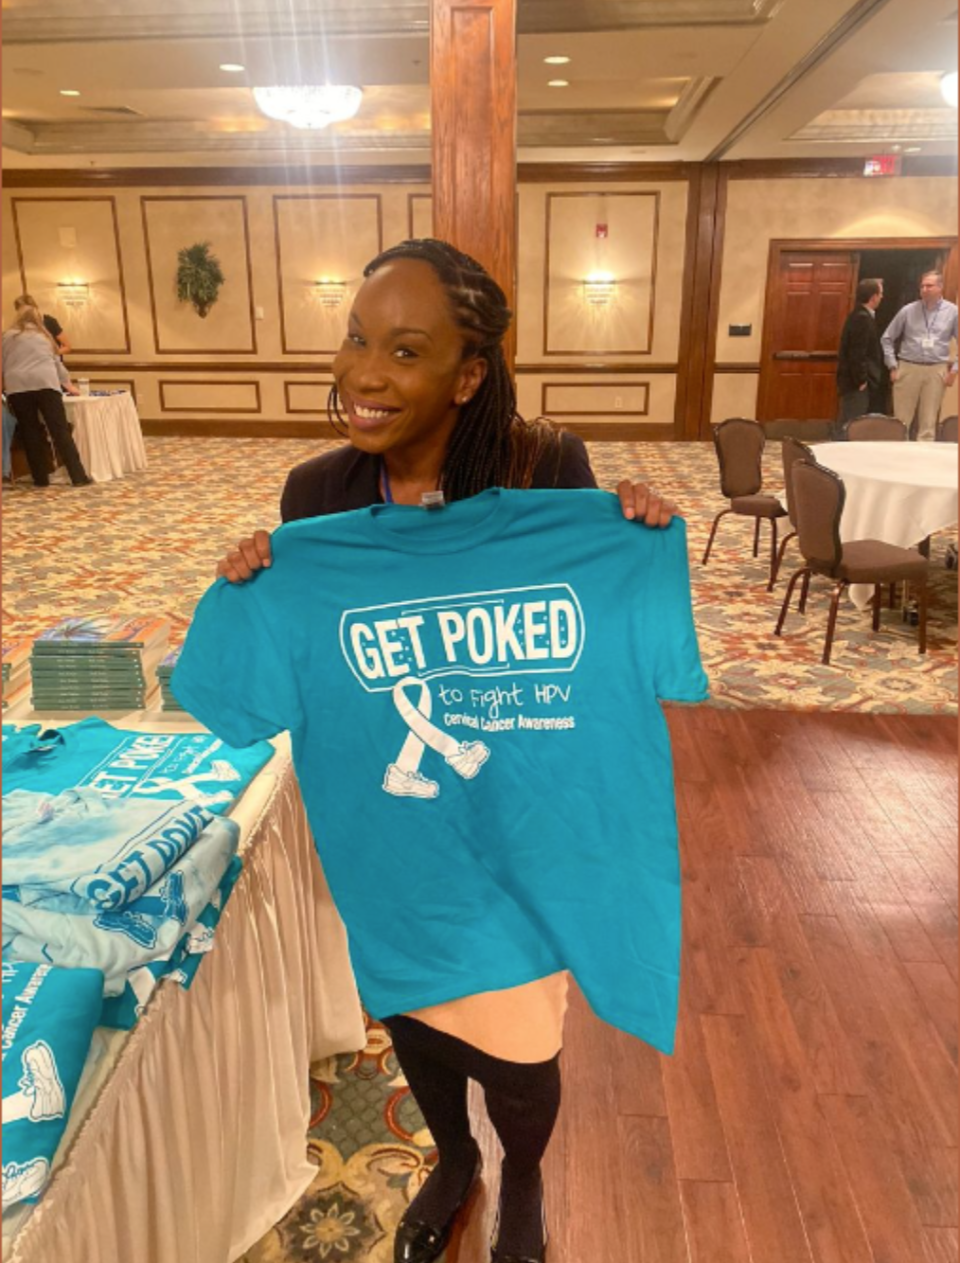 Gabrielle Darville-Sanders at the Vaccinate Indiana event in November 2022. Darville-Sanders said that boys are actually the highest carriers of HPV, but they don’t have clinical symptoms like girls do.